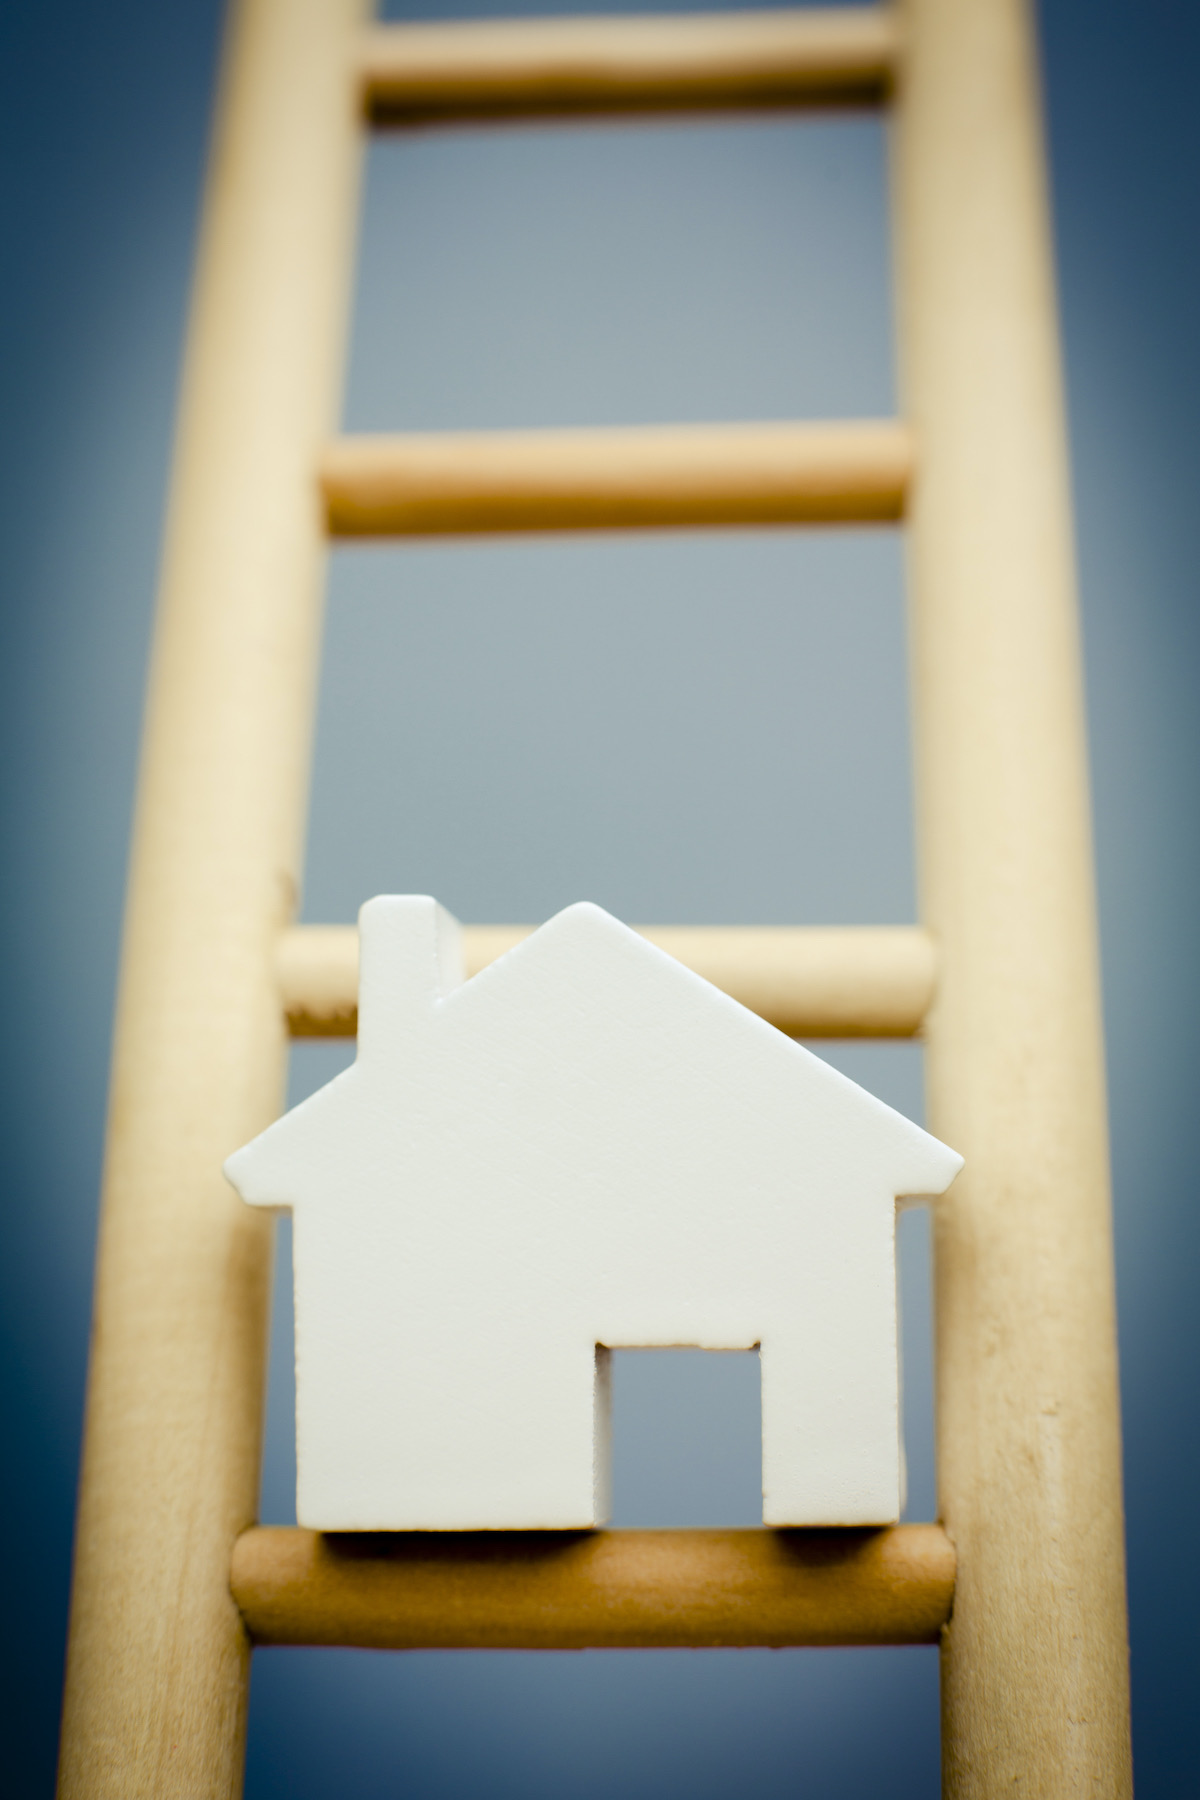 family offset mortgage property ladder